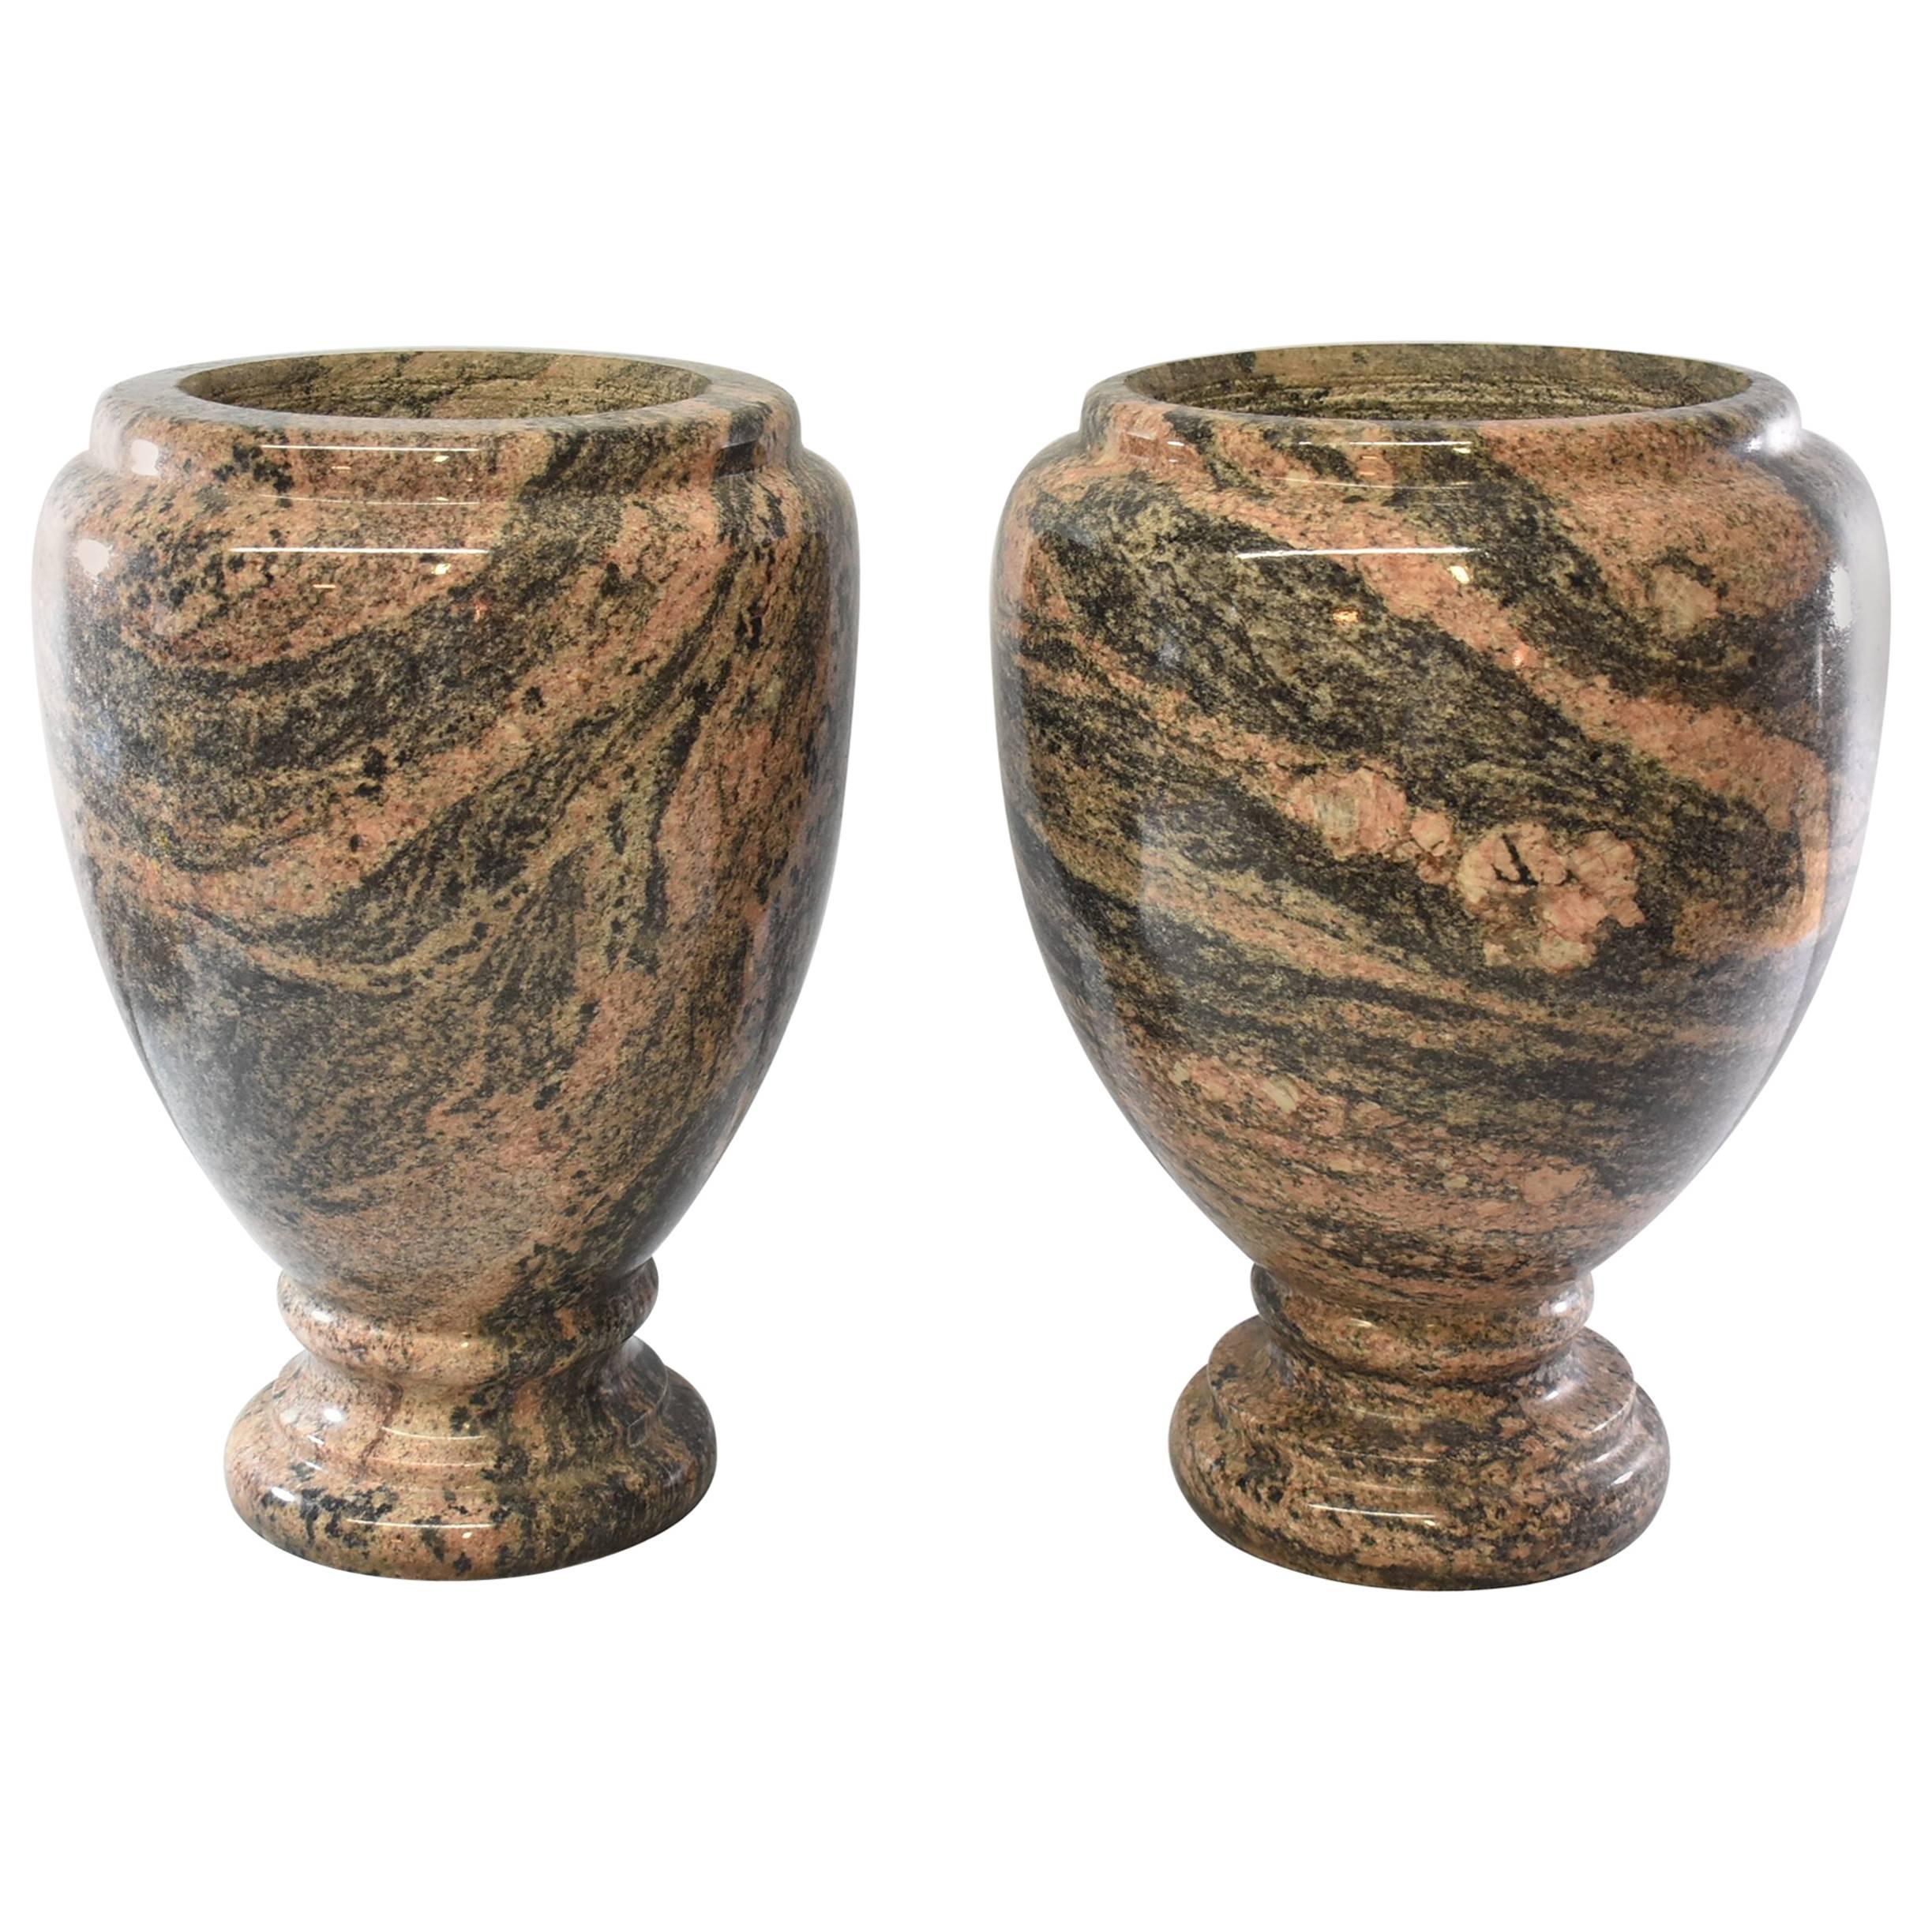 20th Century Turned and Polished Set of Two 16" Tall Granite Urns / Planters